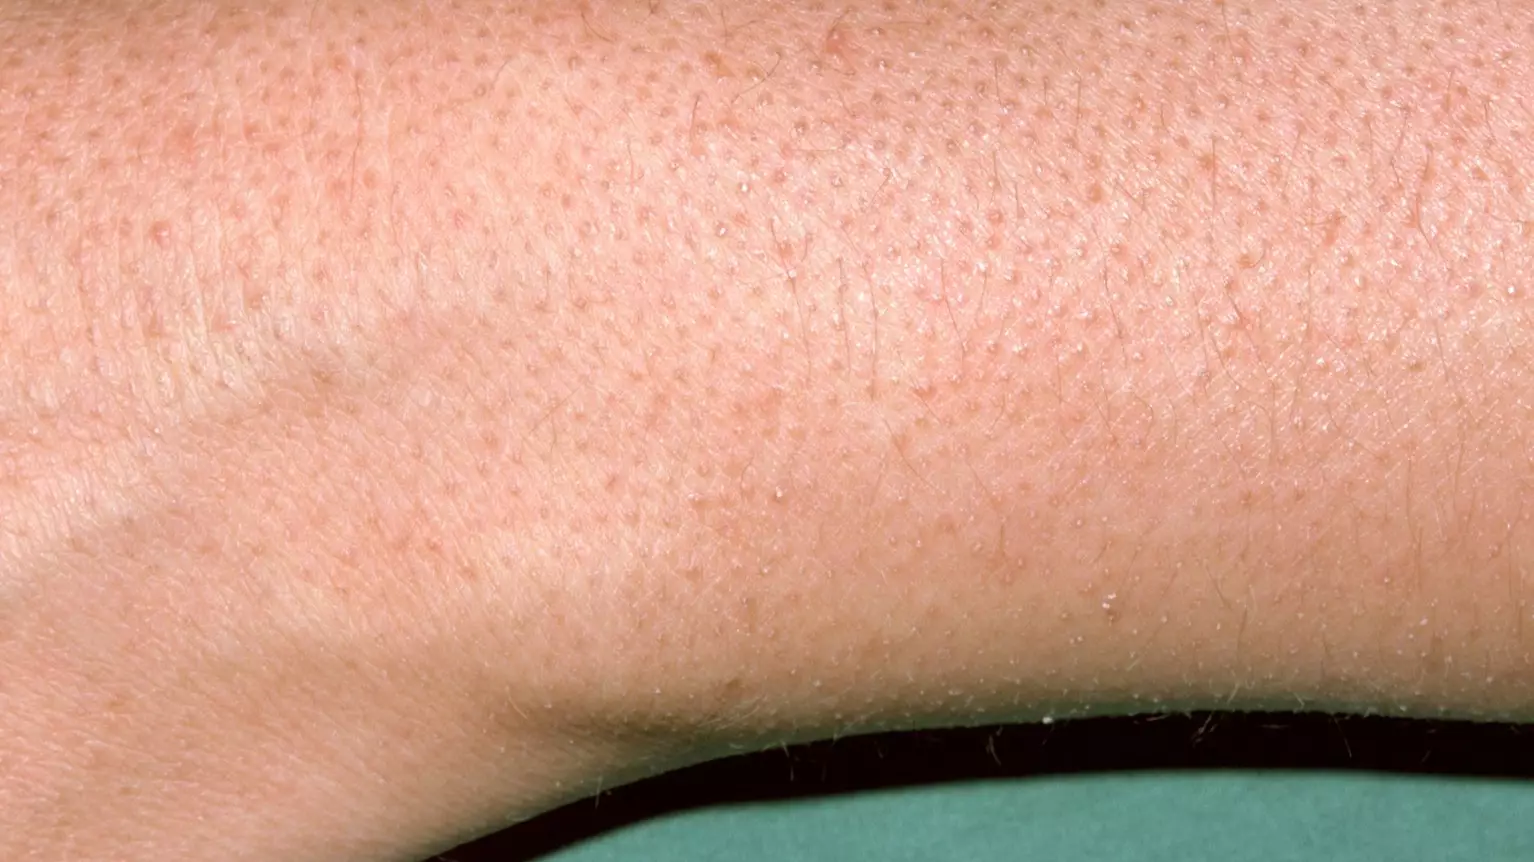 TikTok Doctor Explains What The 'Weird Red Bumps' On People's Arms Are